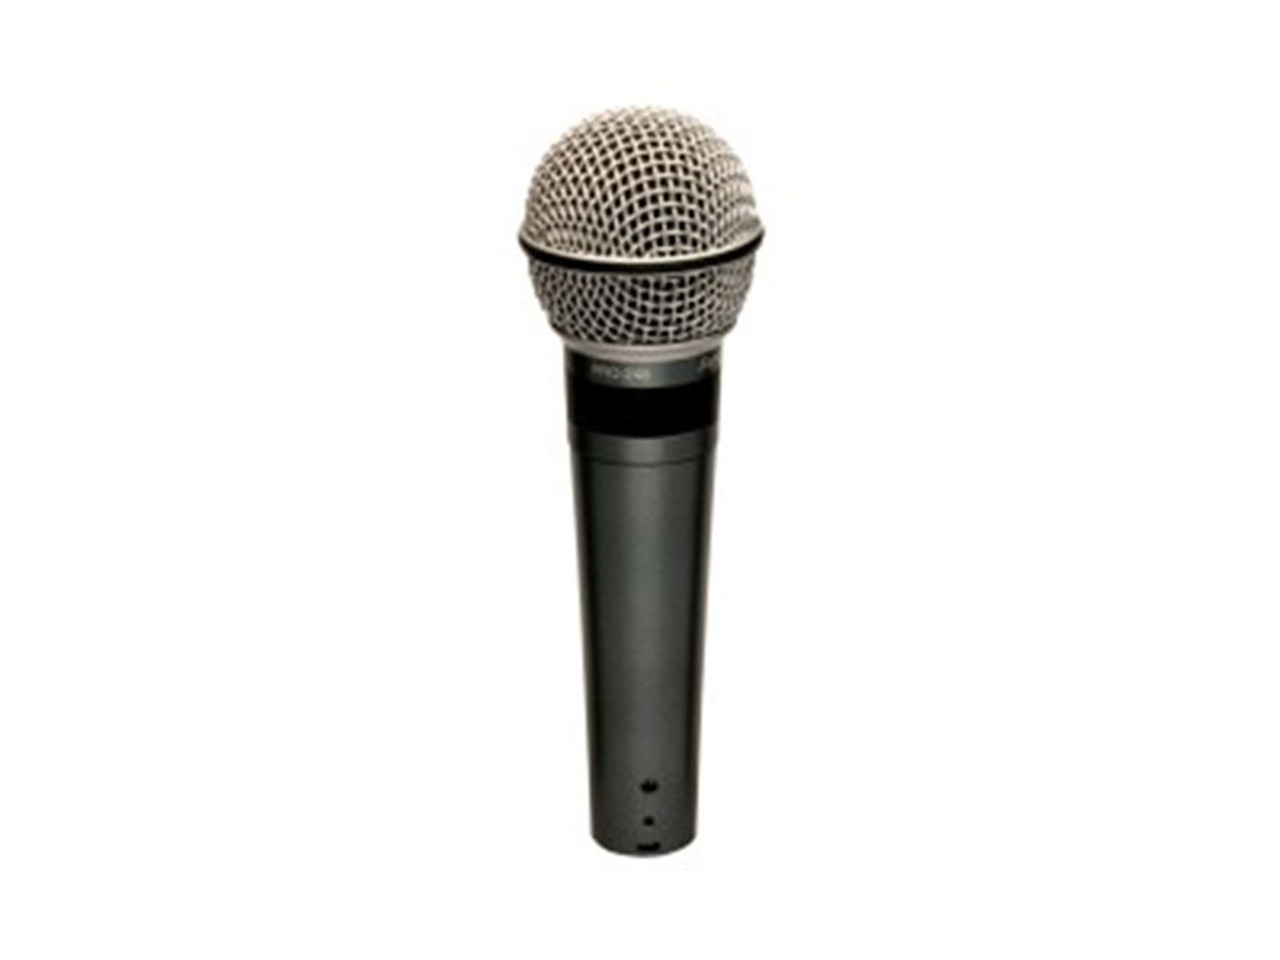 Avlex PRO-248 Supercardioid Dynamic Vocal Microphone